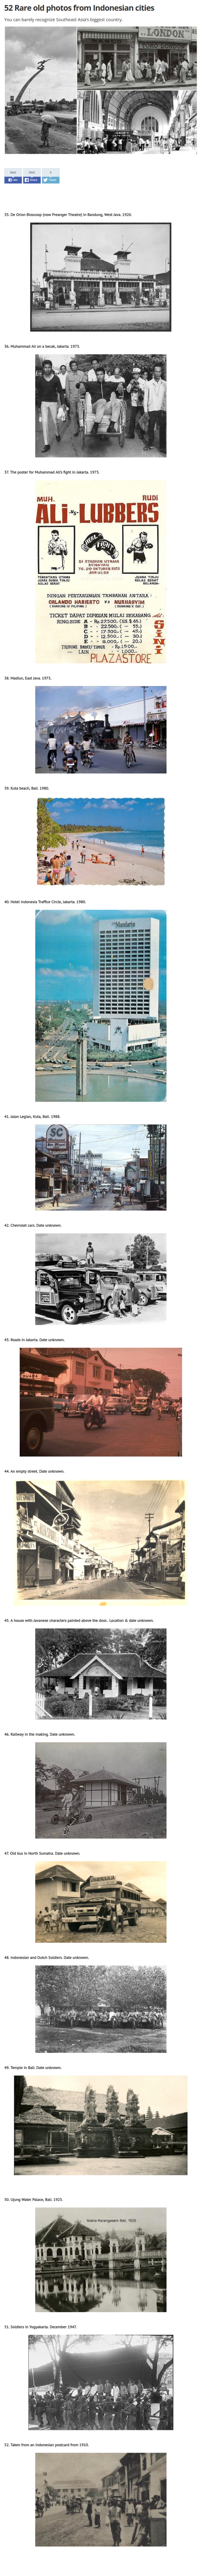 ./20160915-1138-cet-indonesian-old-photos-5.png